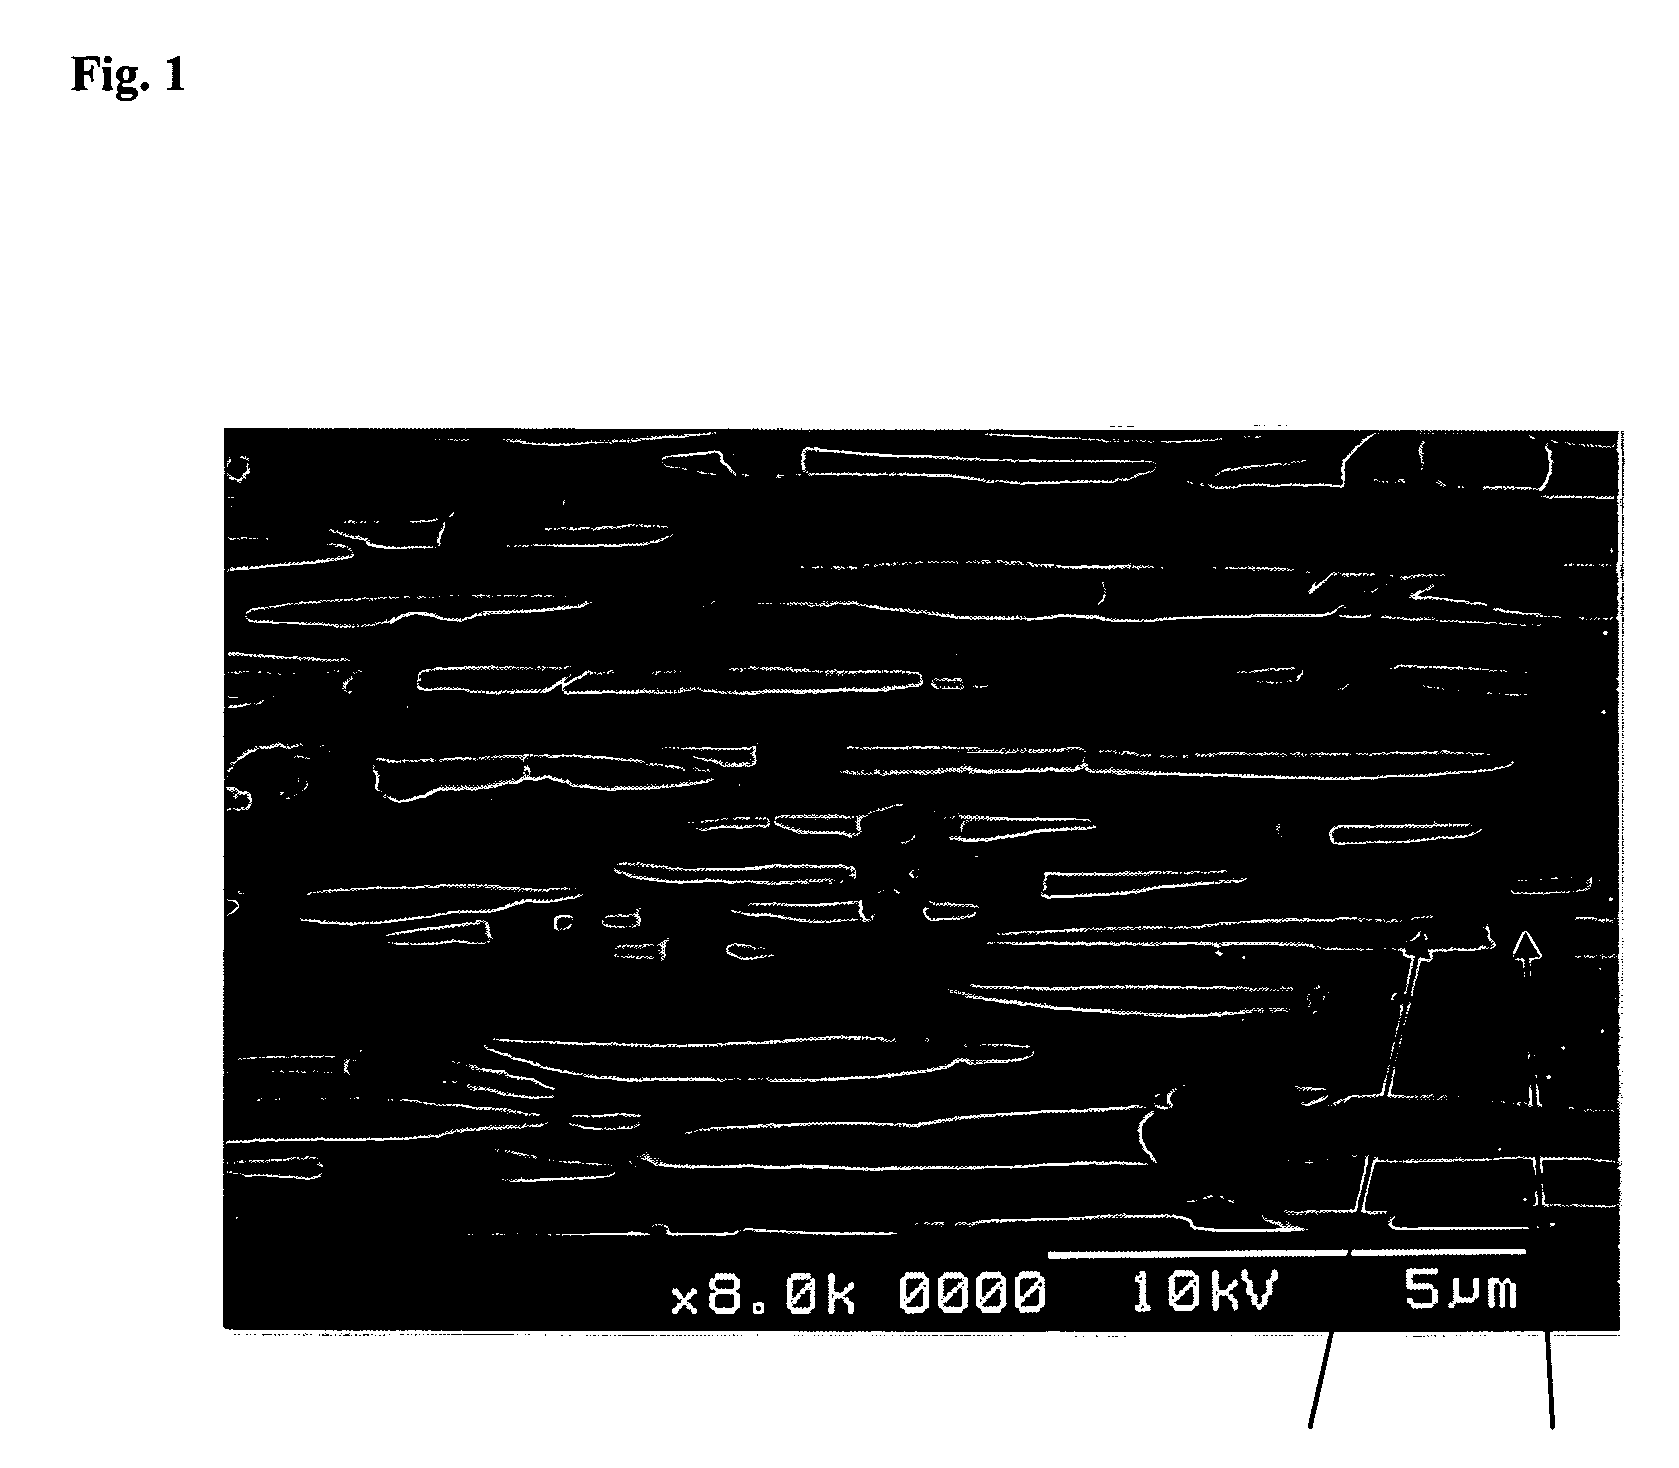 Biaxially oriented white polypropylene film for thermal transfer recording and receiving sheet for thermal transfer recording therefrom